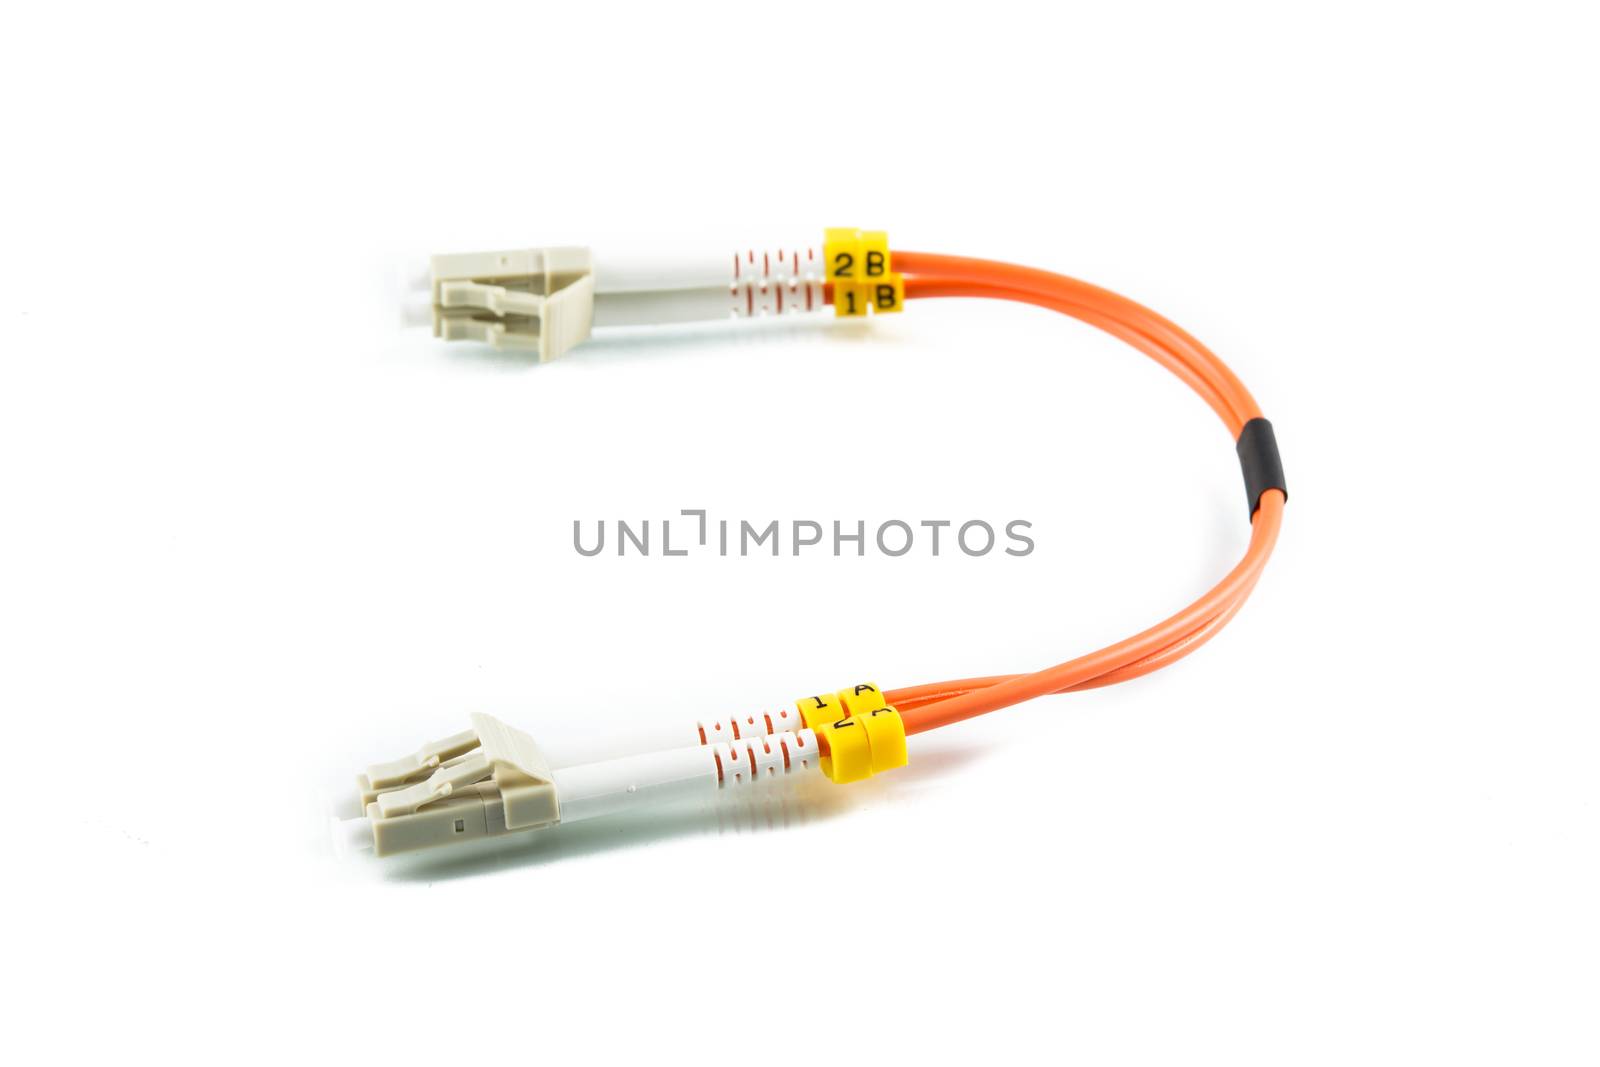 Fiber optic single mode patch cord on white background